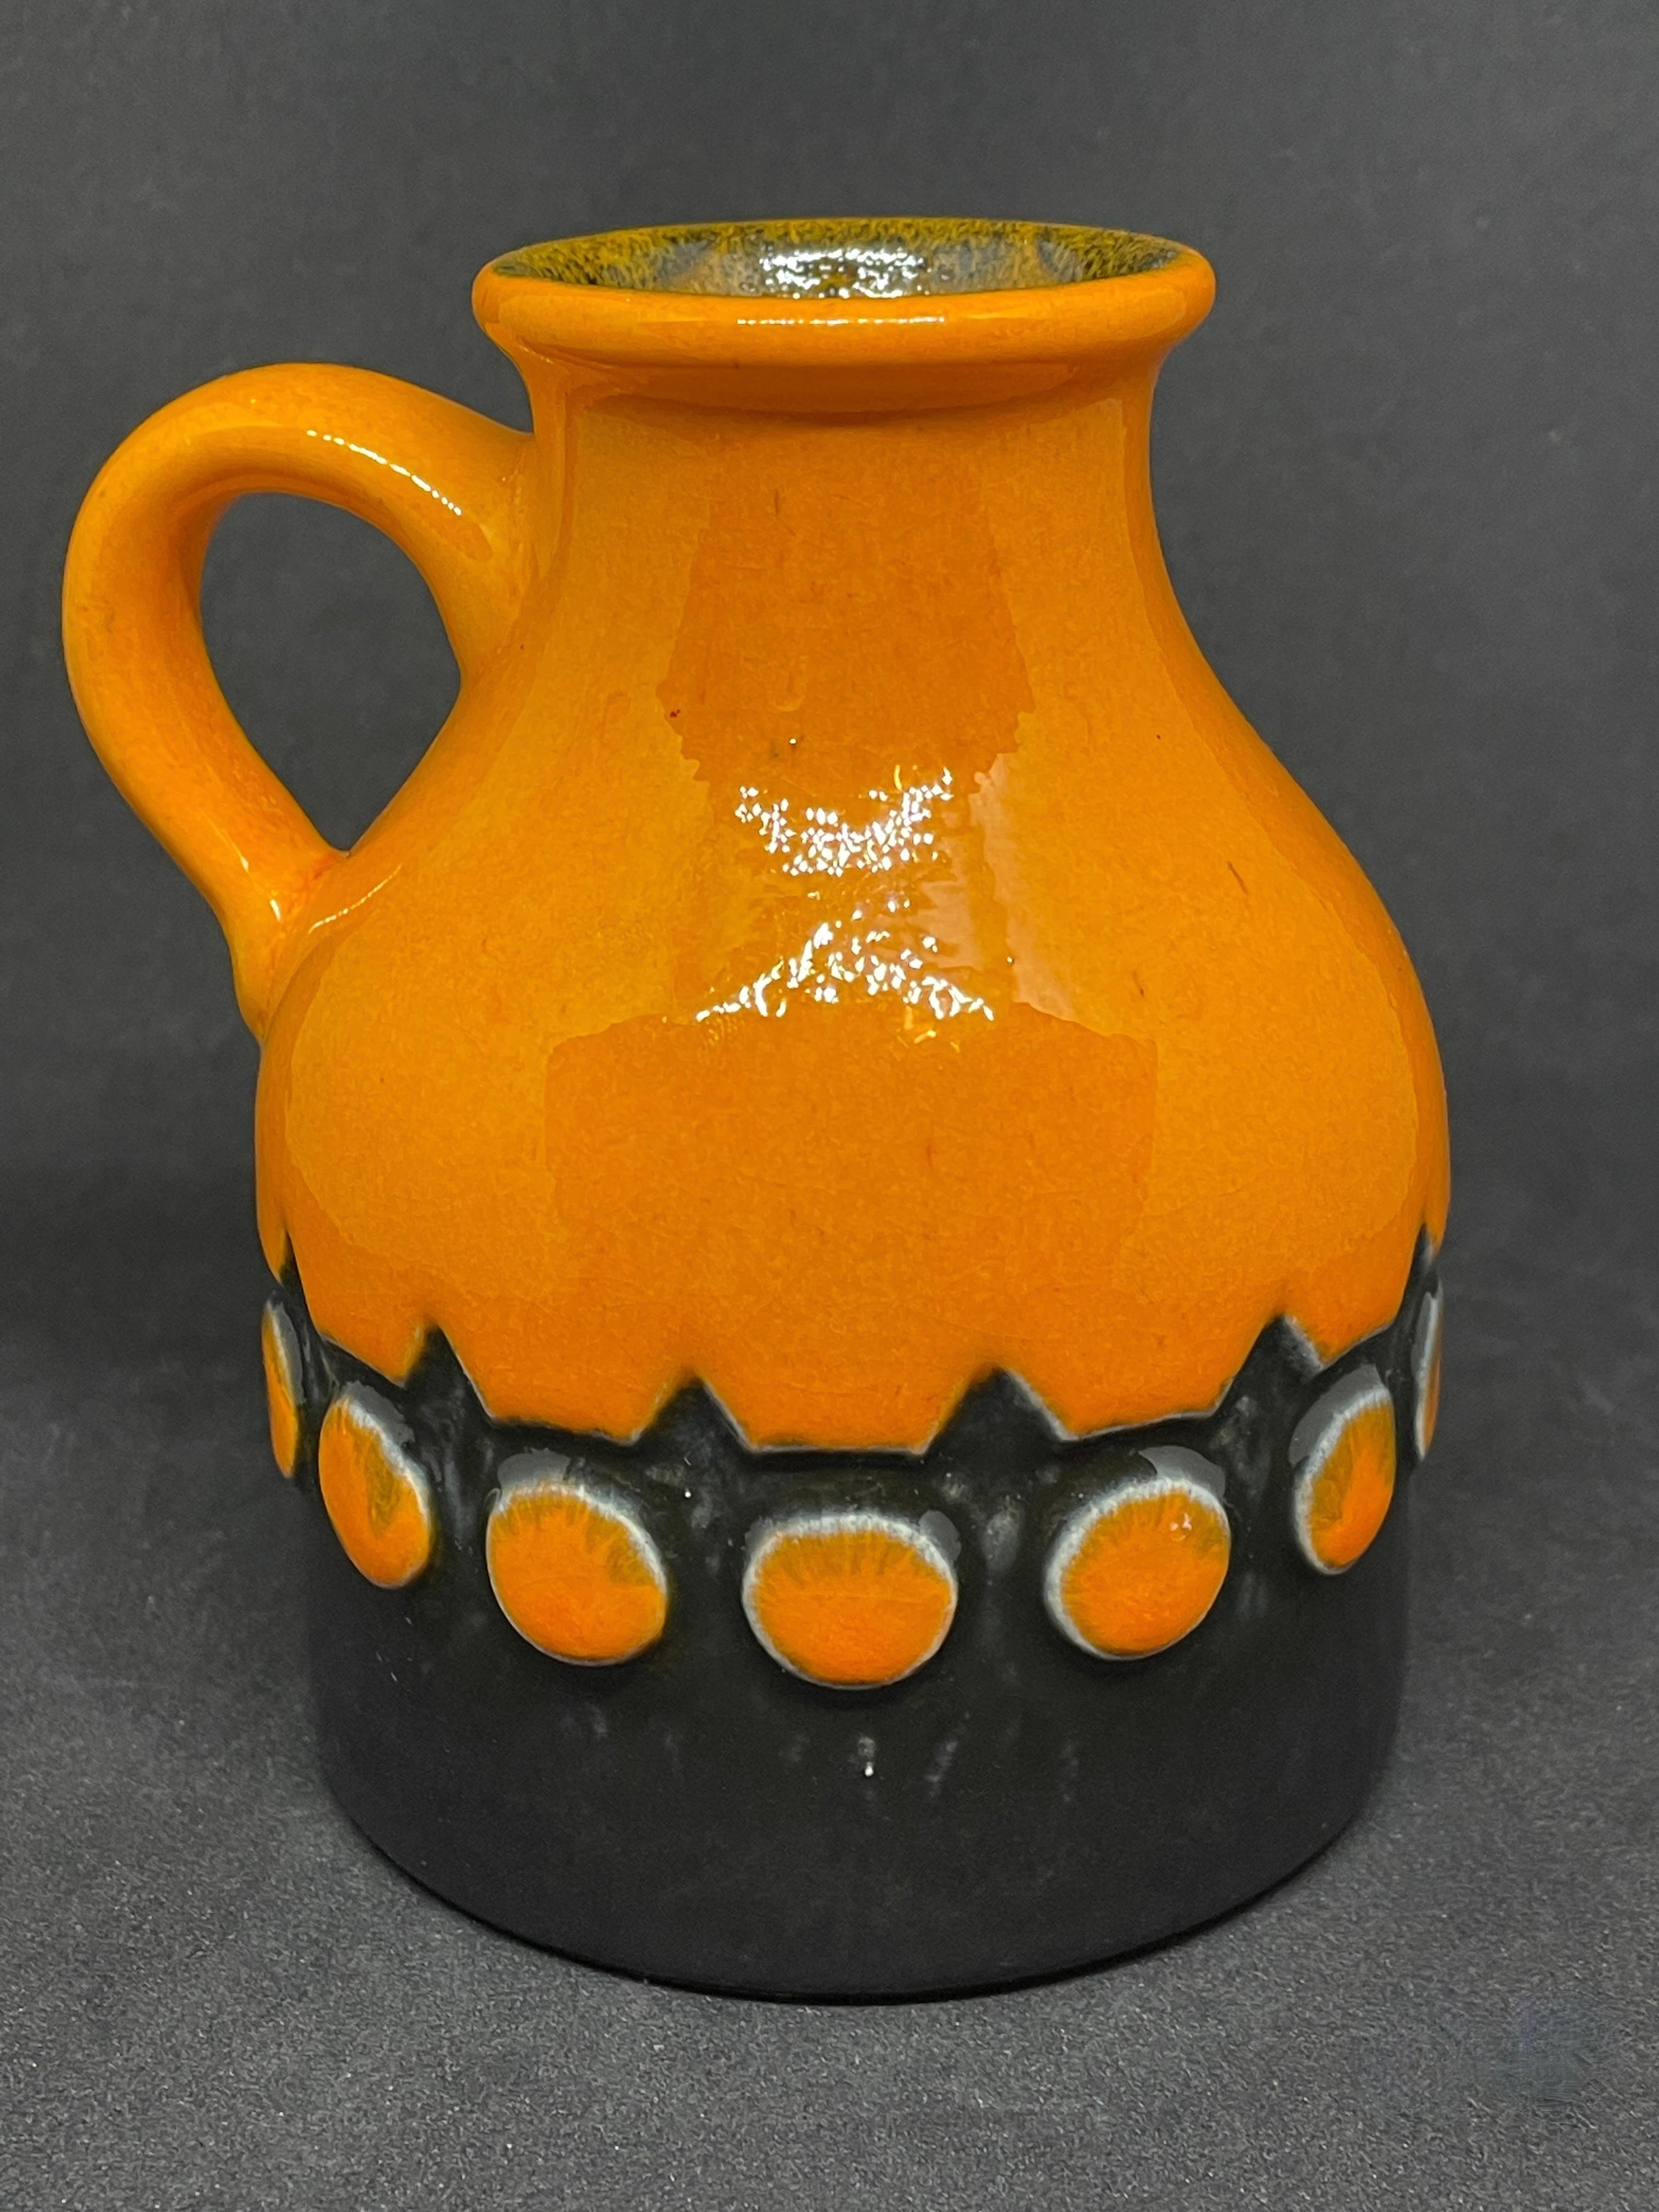 An amazing midcentury studio art pottery vase with orange and brown lava glaze, Germany, circa 1970s. Vase is in very good condition with no chips, cracks, or flea bites. Signed with a number at the base and manufactory logo.